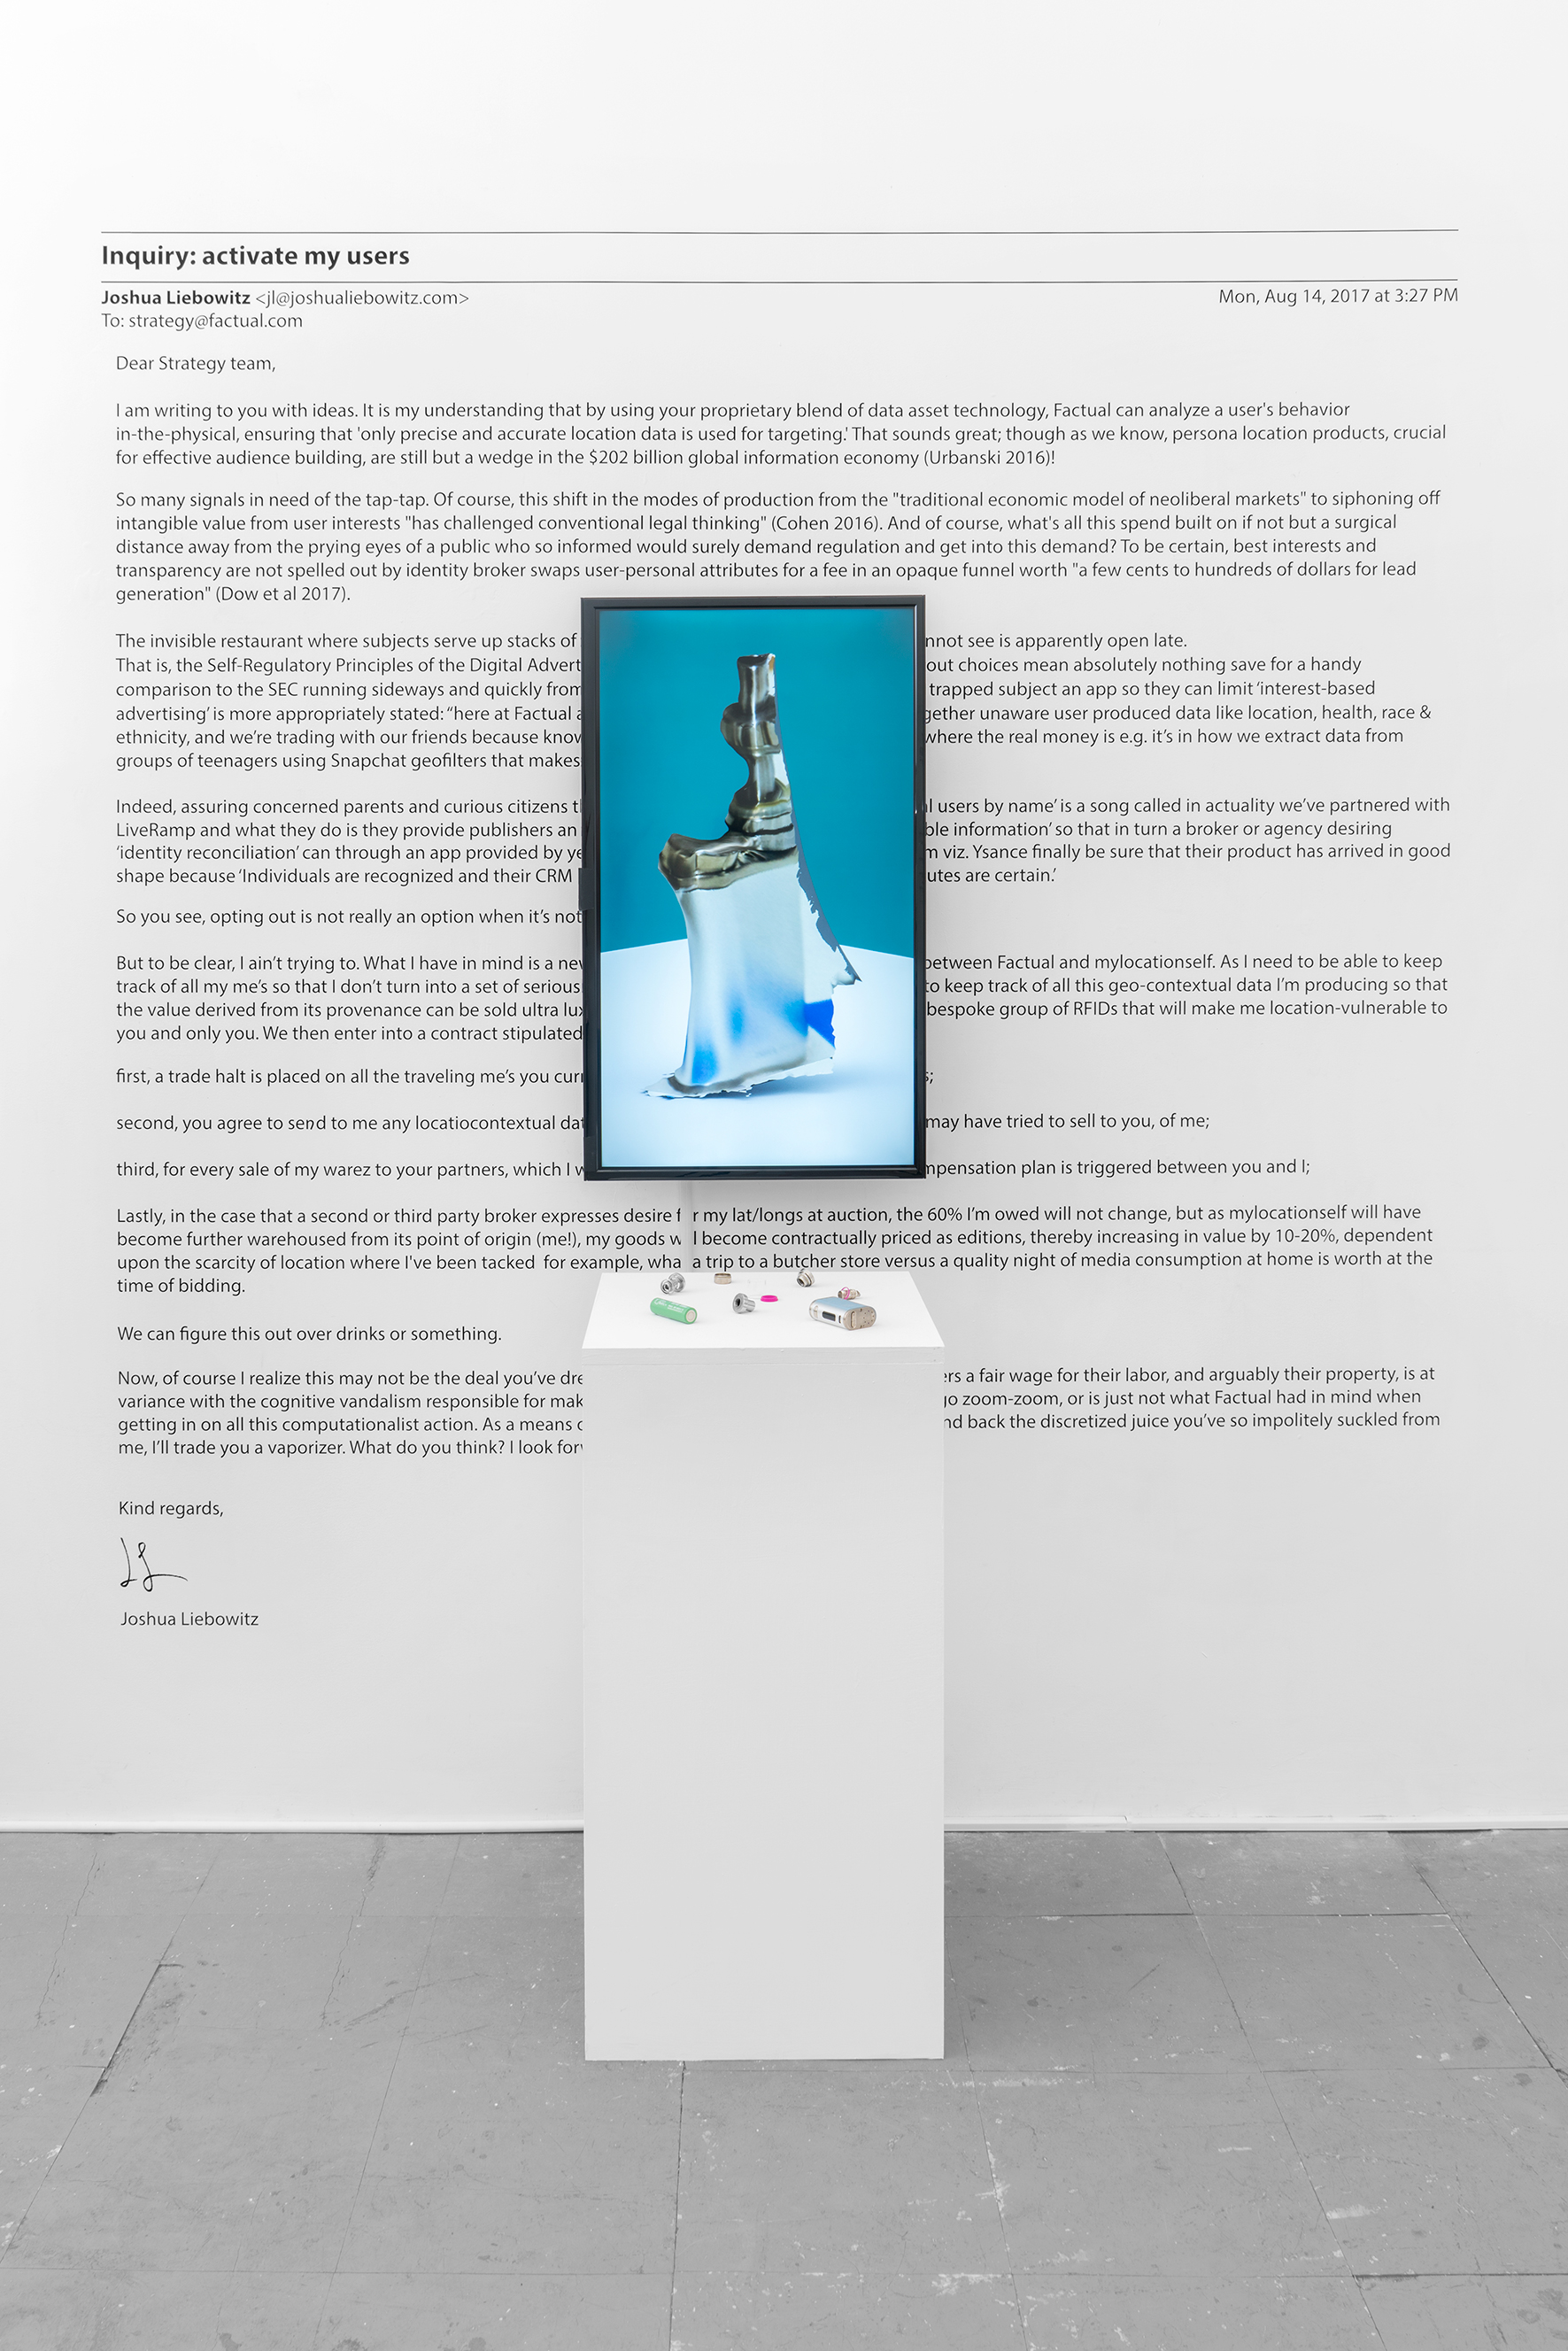   Being Consignment: A Strategy  2017 screen, vaporizer parts, text 17 x 29 x 3 inches, parts and text variable 